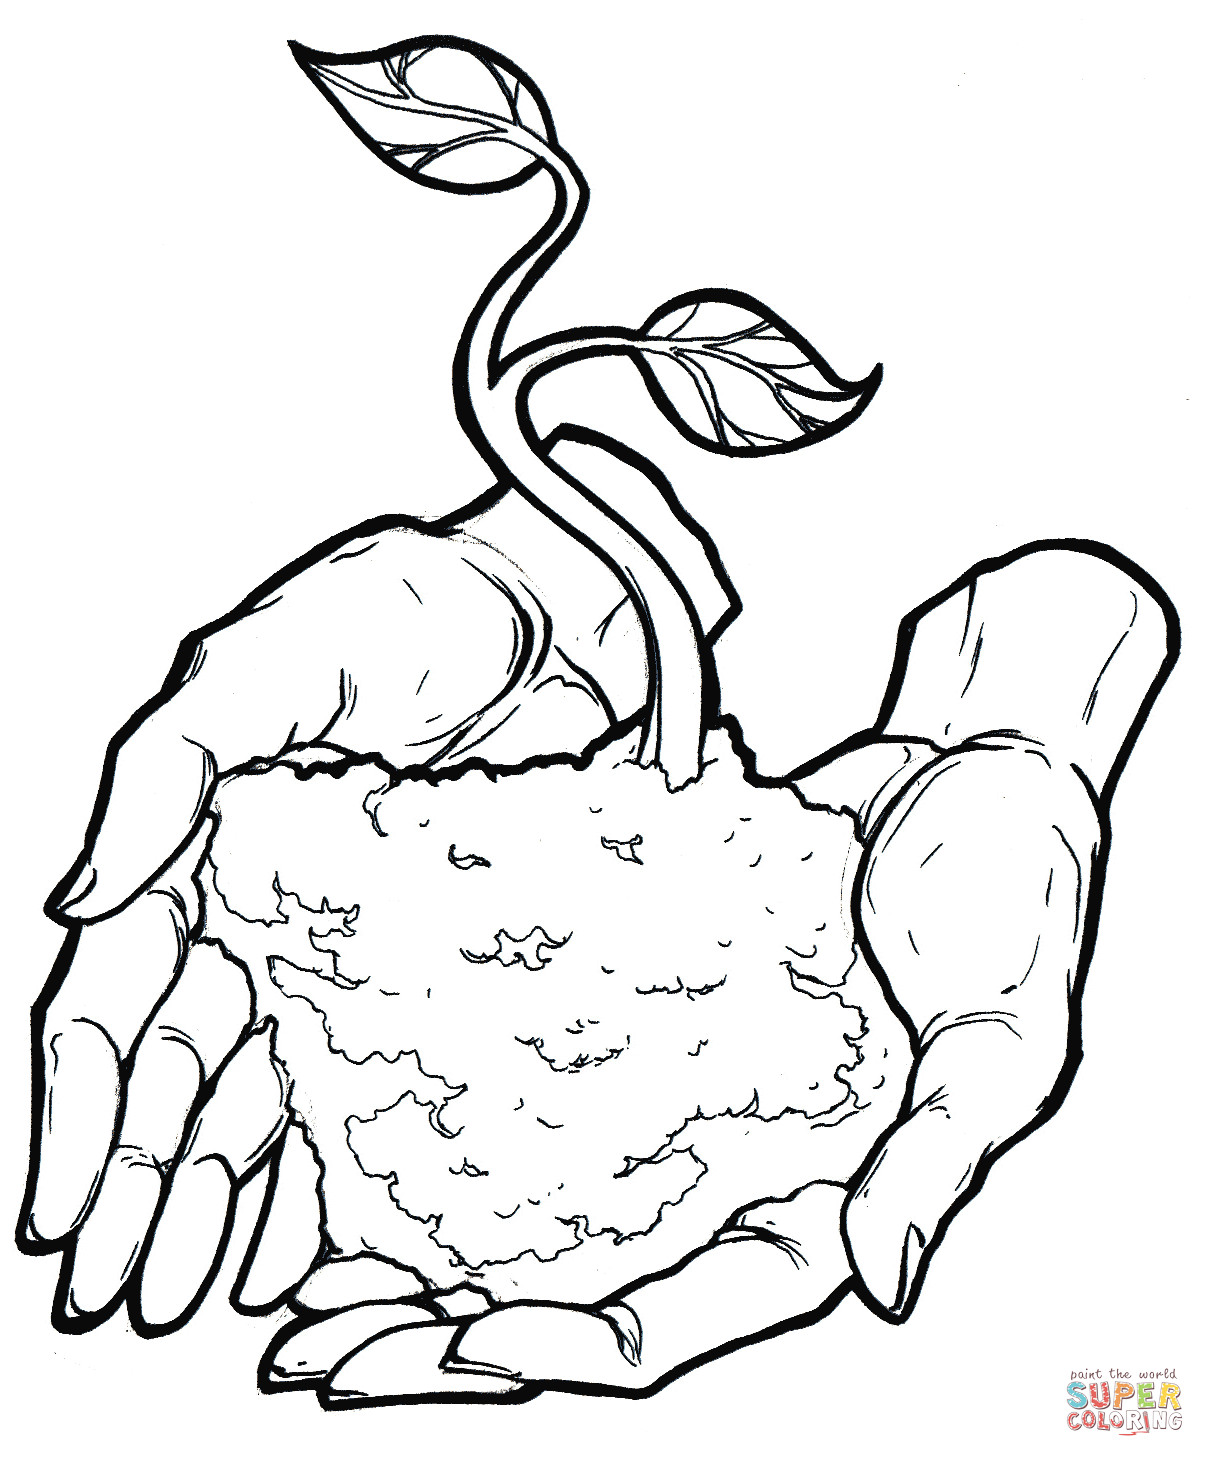 Earth Day Coloring Pages
 Happy Earth Day coloring page